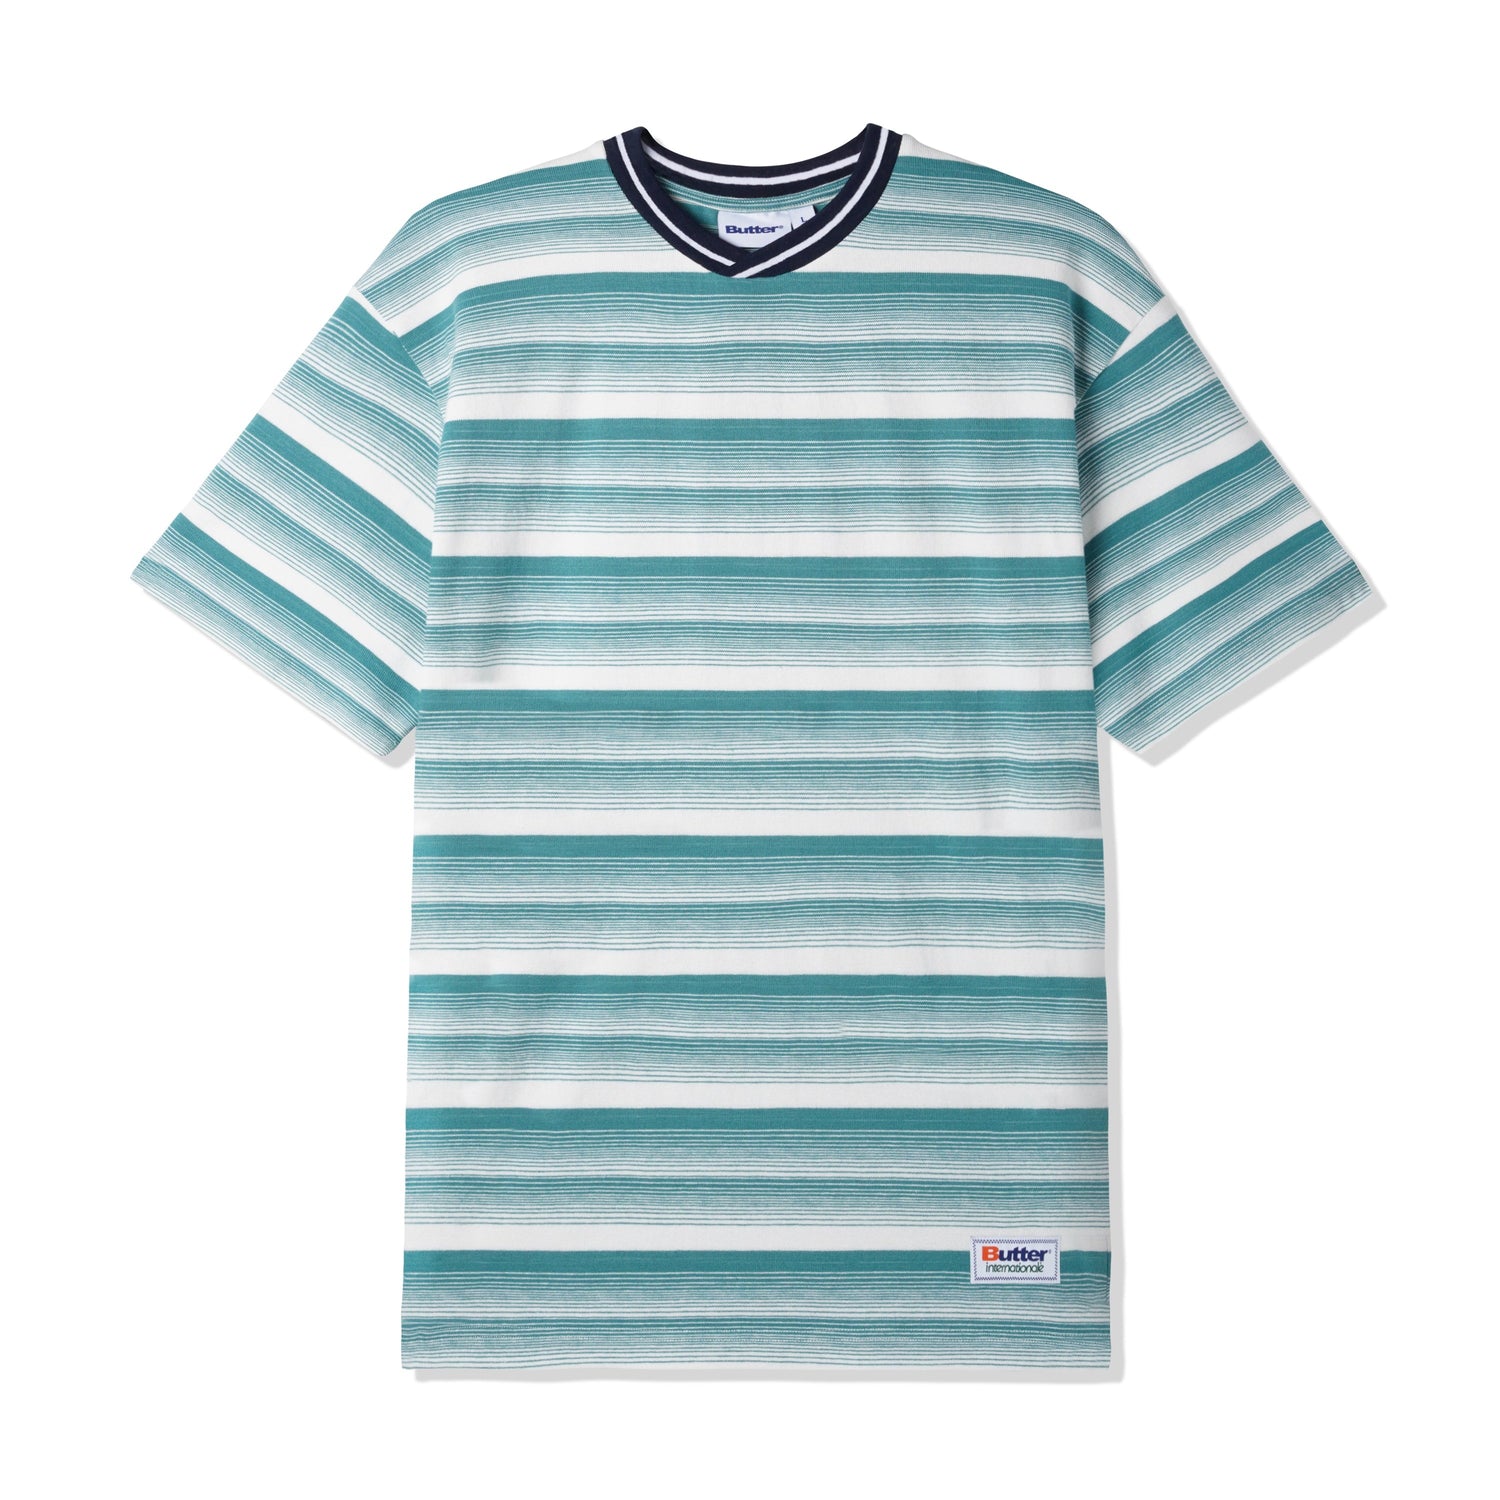 Internationale Striped Tee, White / Teal